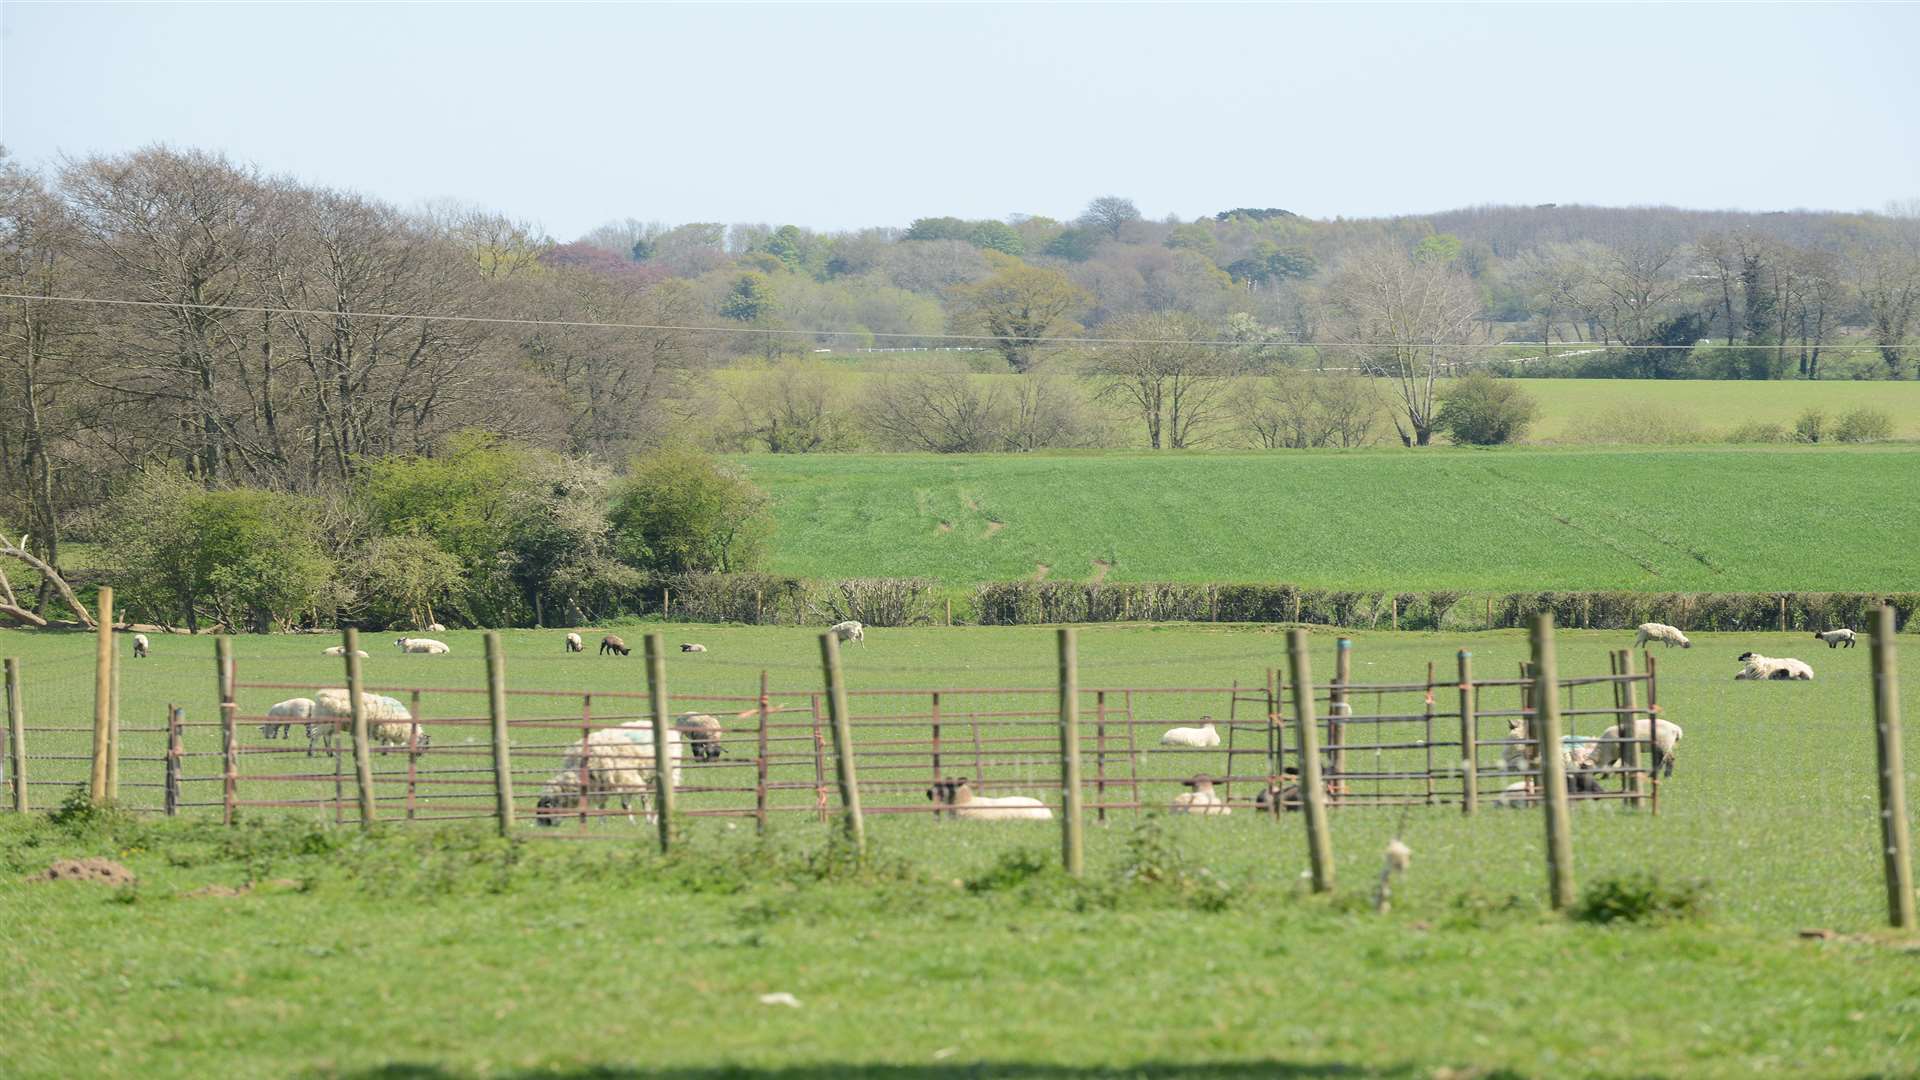 The site is currently used for farming